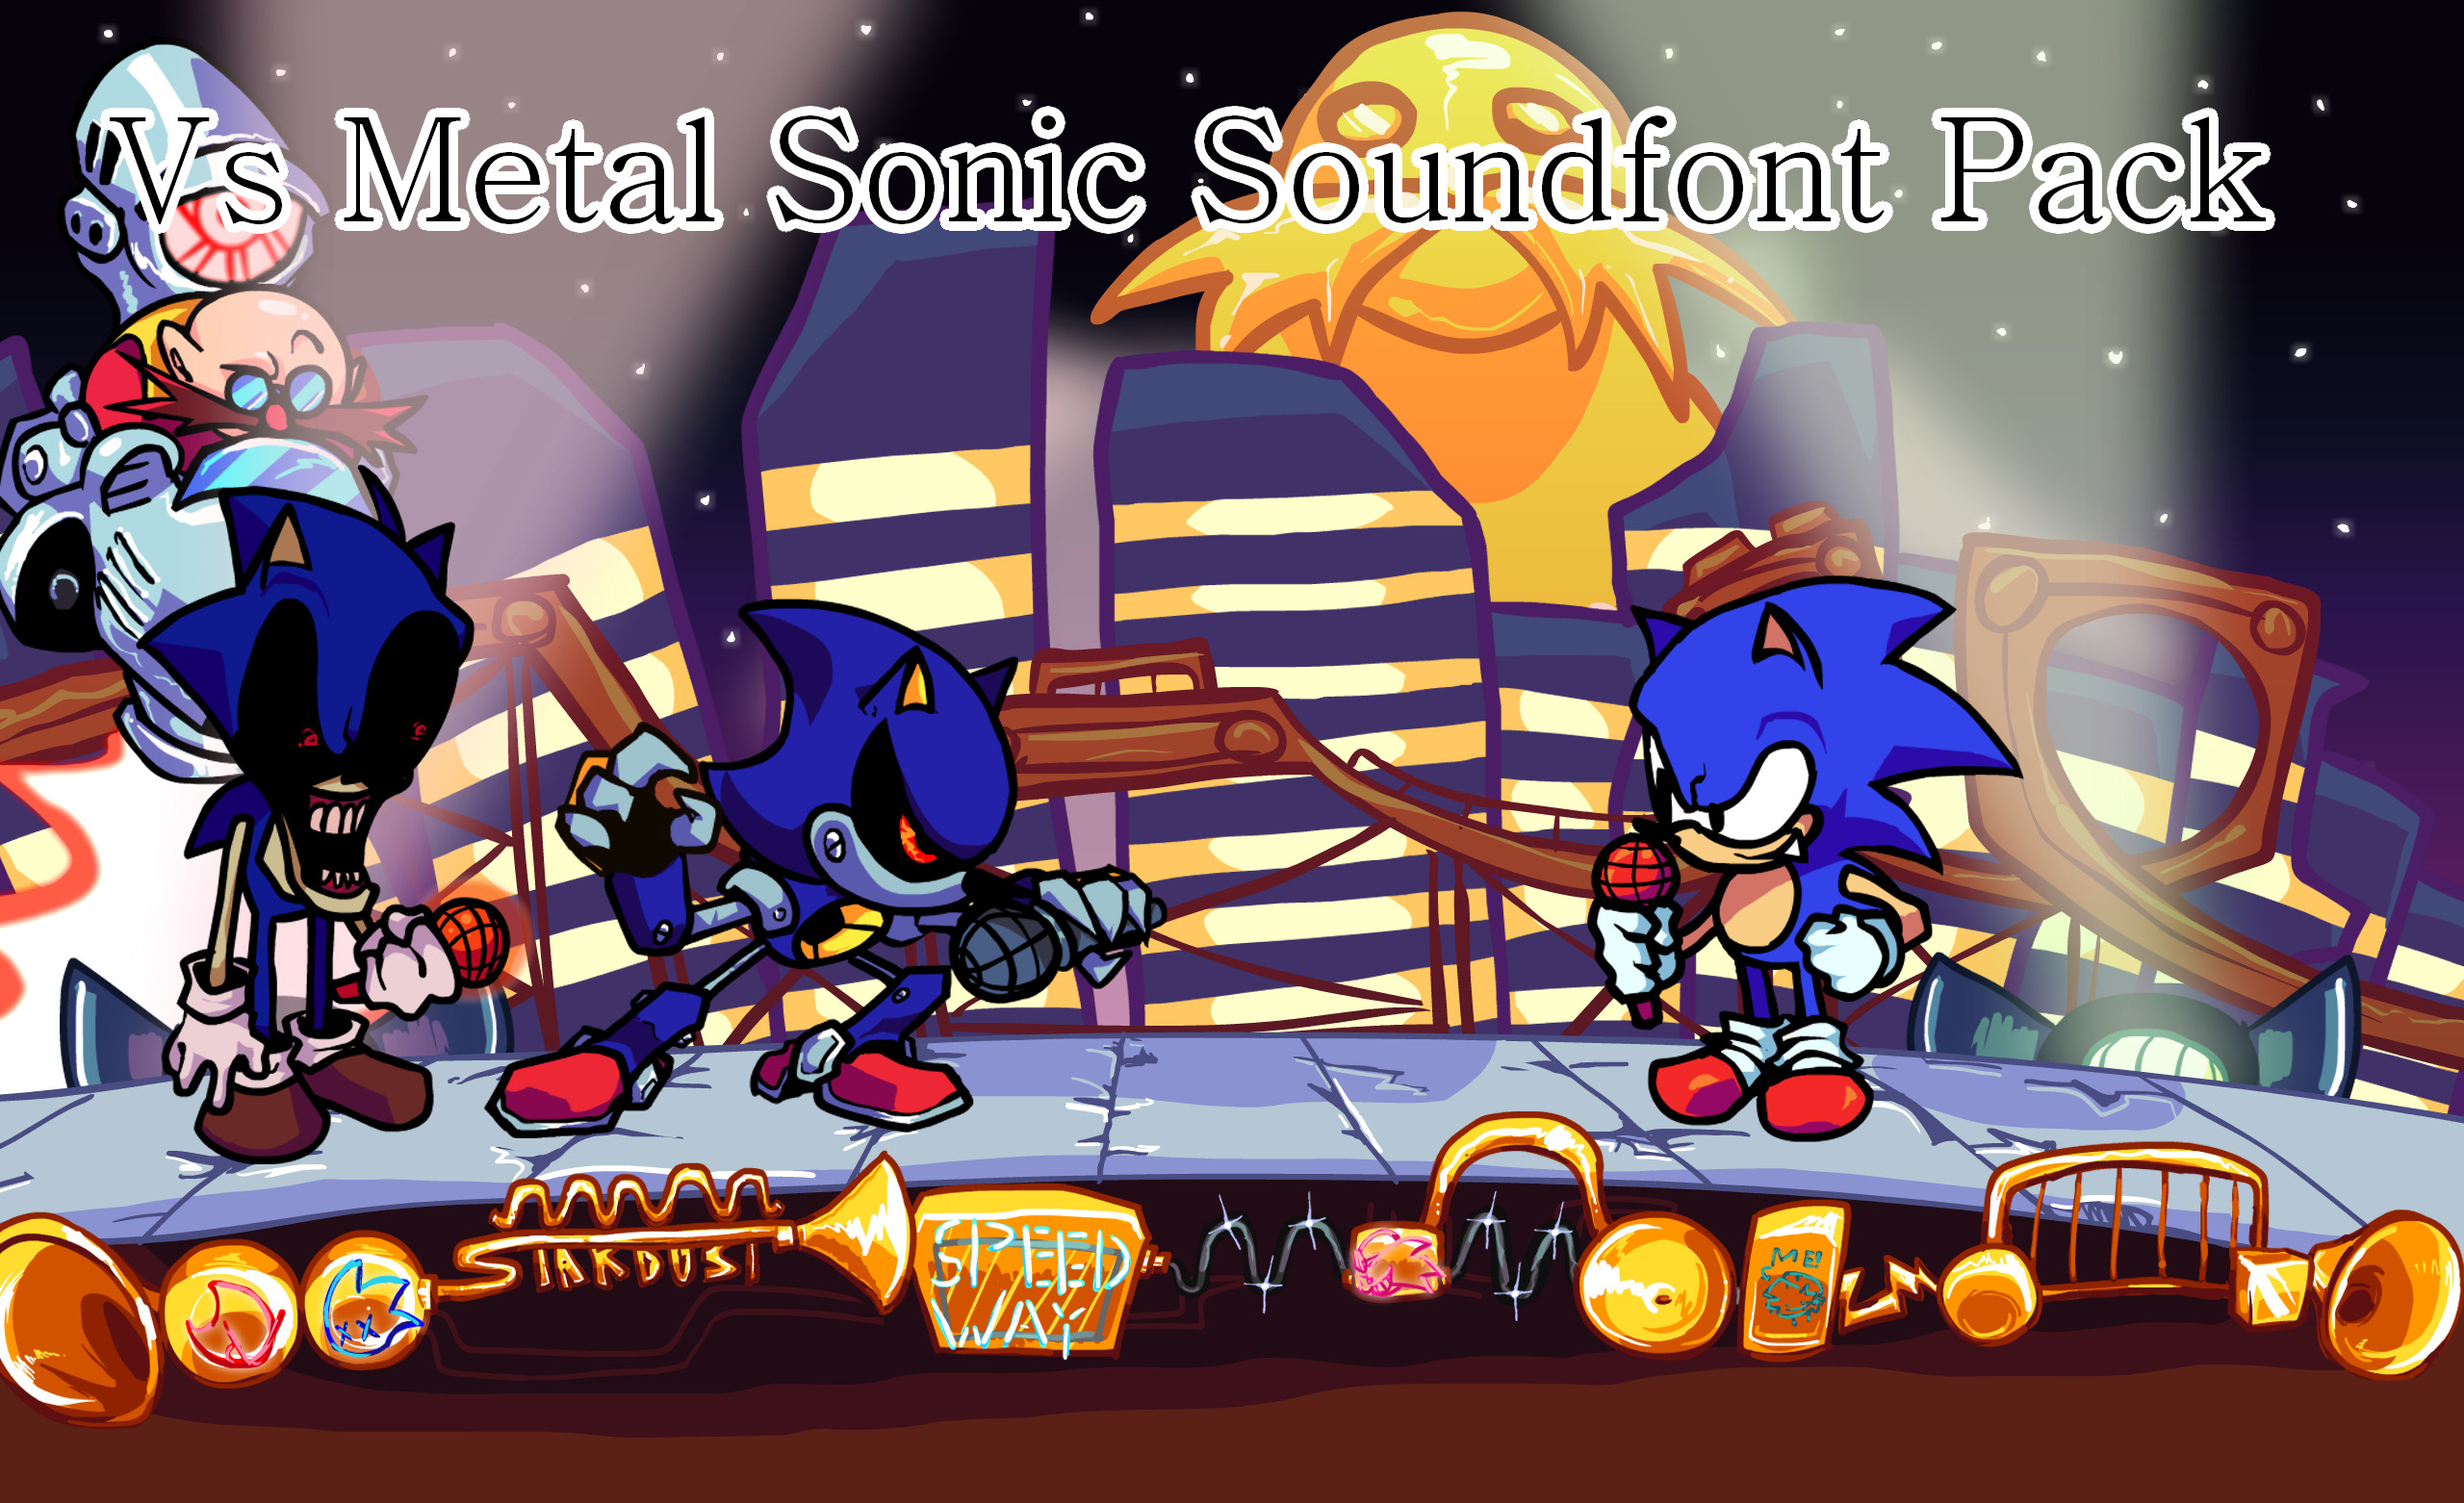 Vs Metal Sonic Soundfont Pack (sf2) [Friday Night Funkin